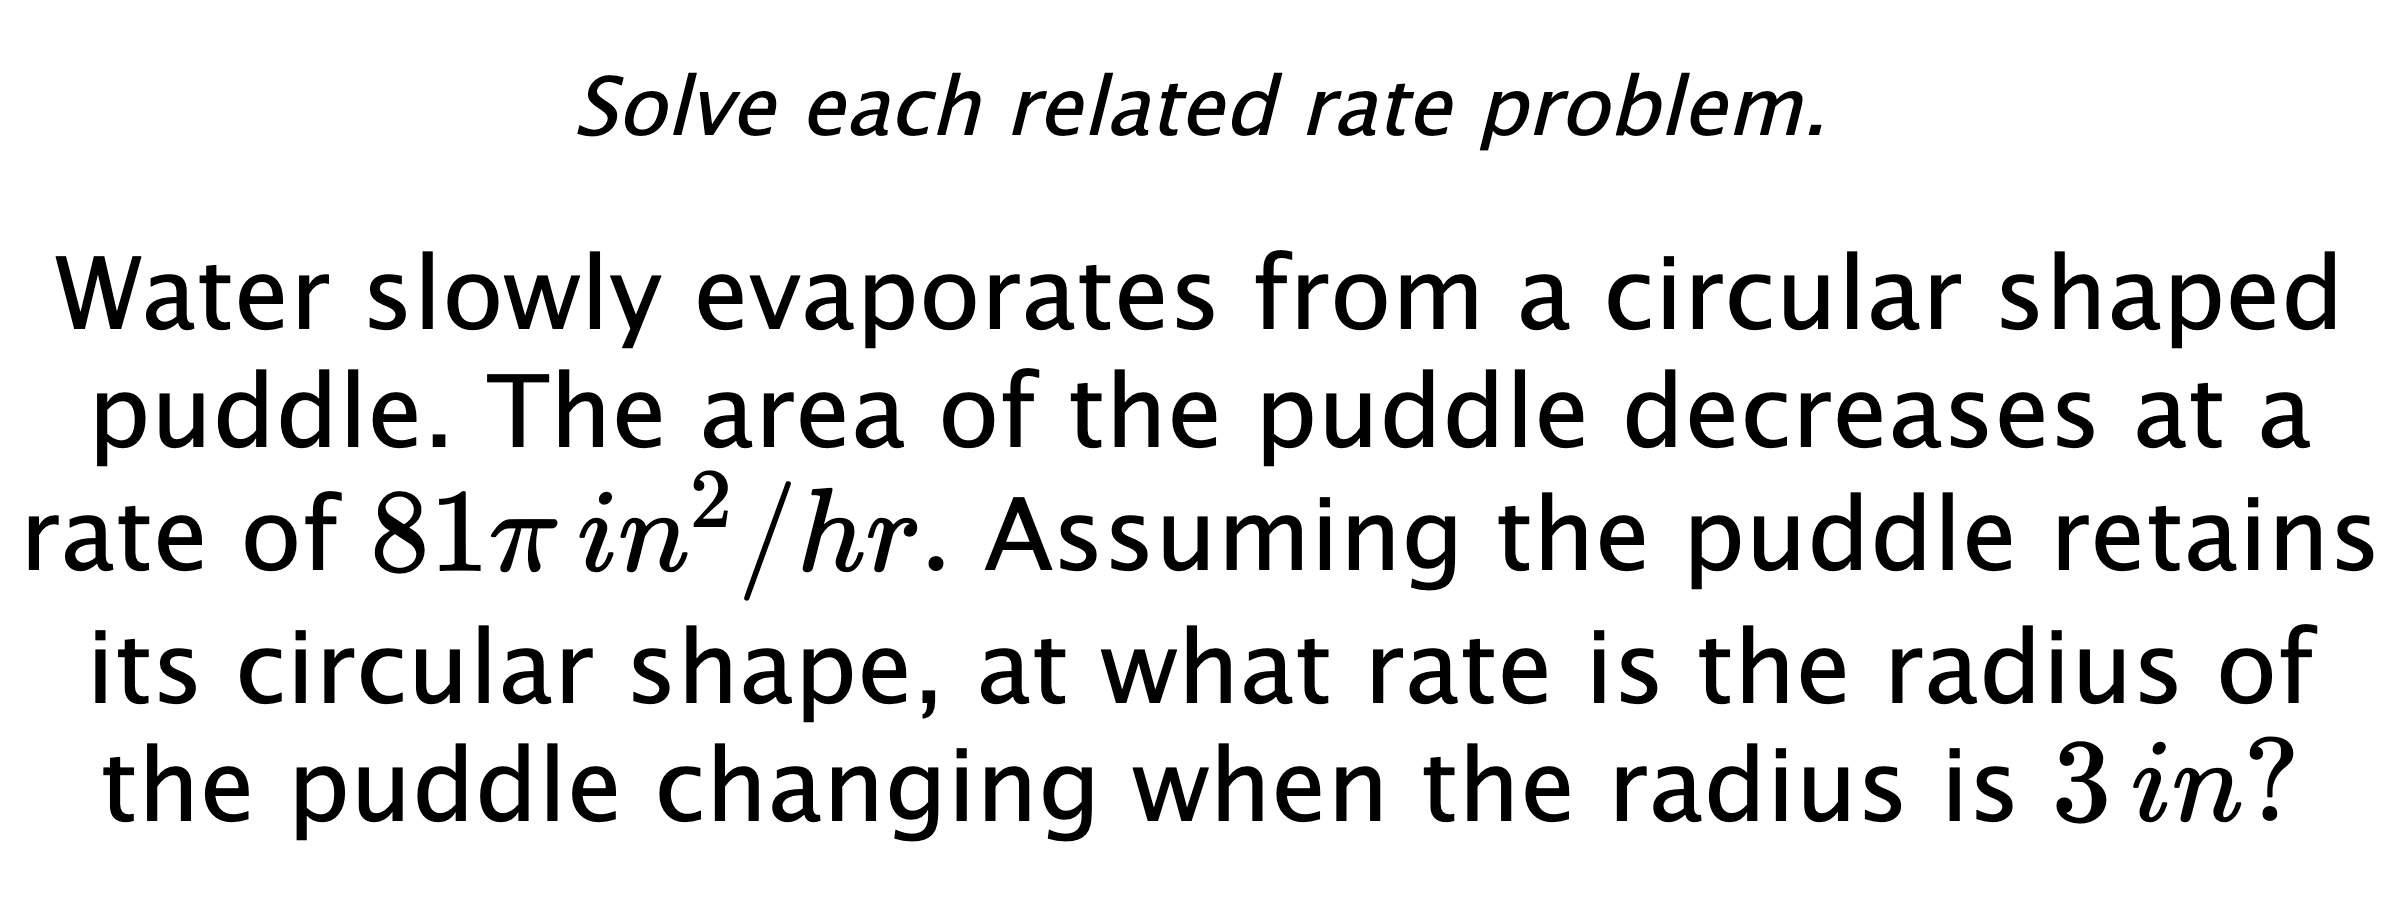 Solve each related rate problem. Water slowly evaporates from a circular shaped puddle. The area of the puddle decreases at a rate of $81\pi\,in^{2}/hr.$  Assuming the puddle retains its circular shape, at what rate is the radius of the puddle changing when the radius is $3\,in?$